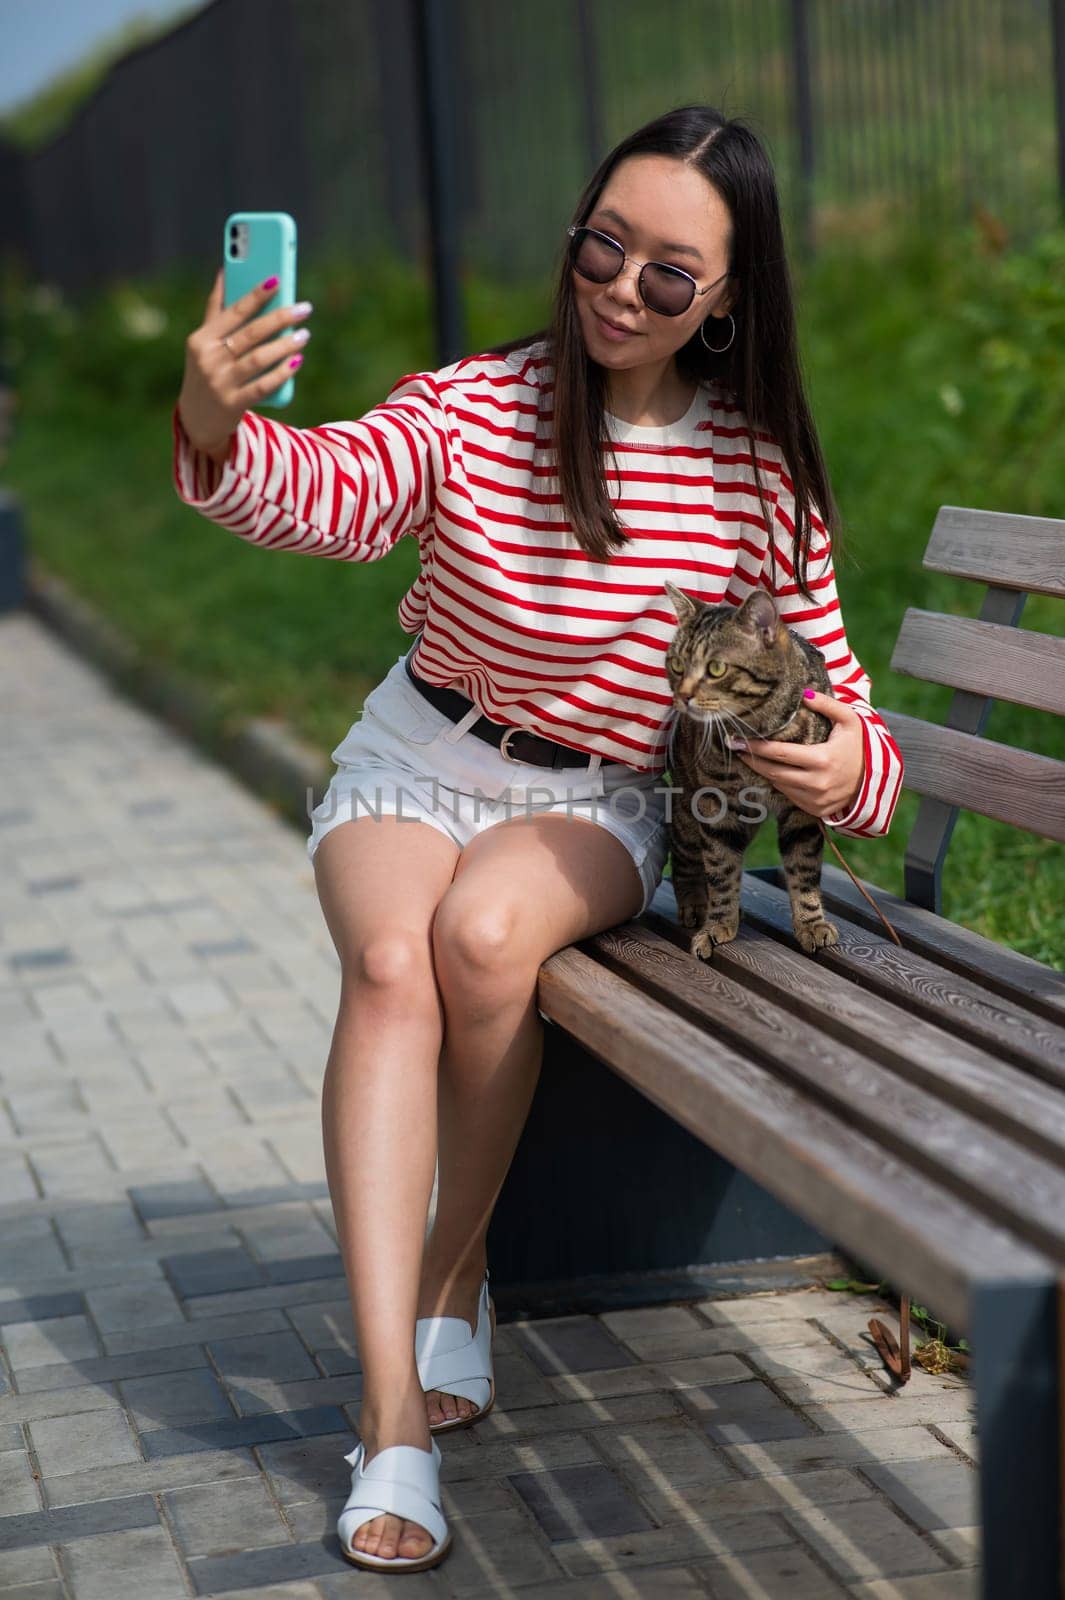 Young woman sits on a bench with a tabby cat and takes a selfie on a smartphone outdoors. by mrwed54